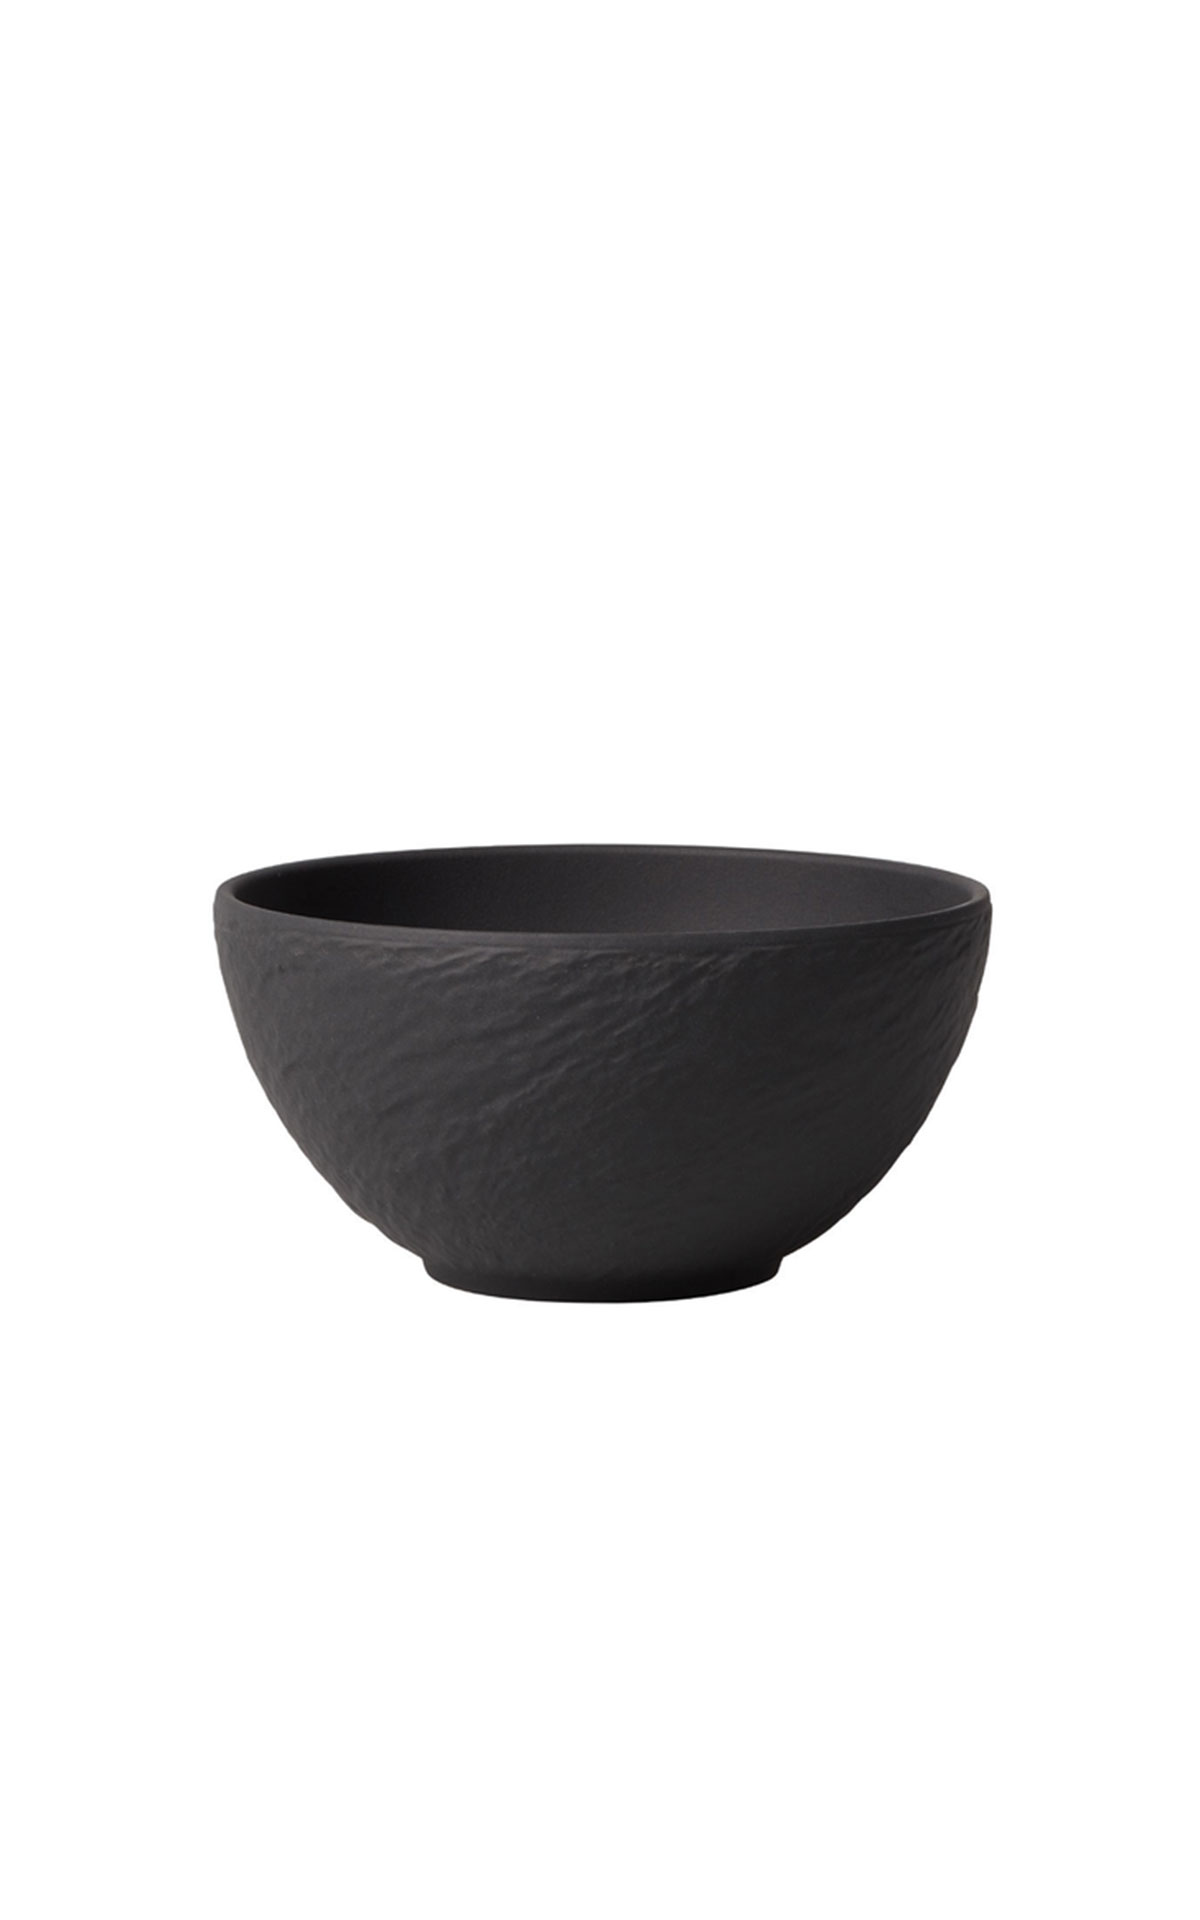 Villeroy and Boch Manufacture rock Bowl from Bicester Village